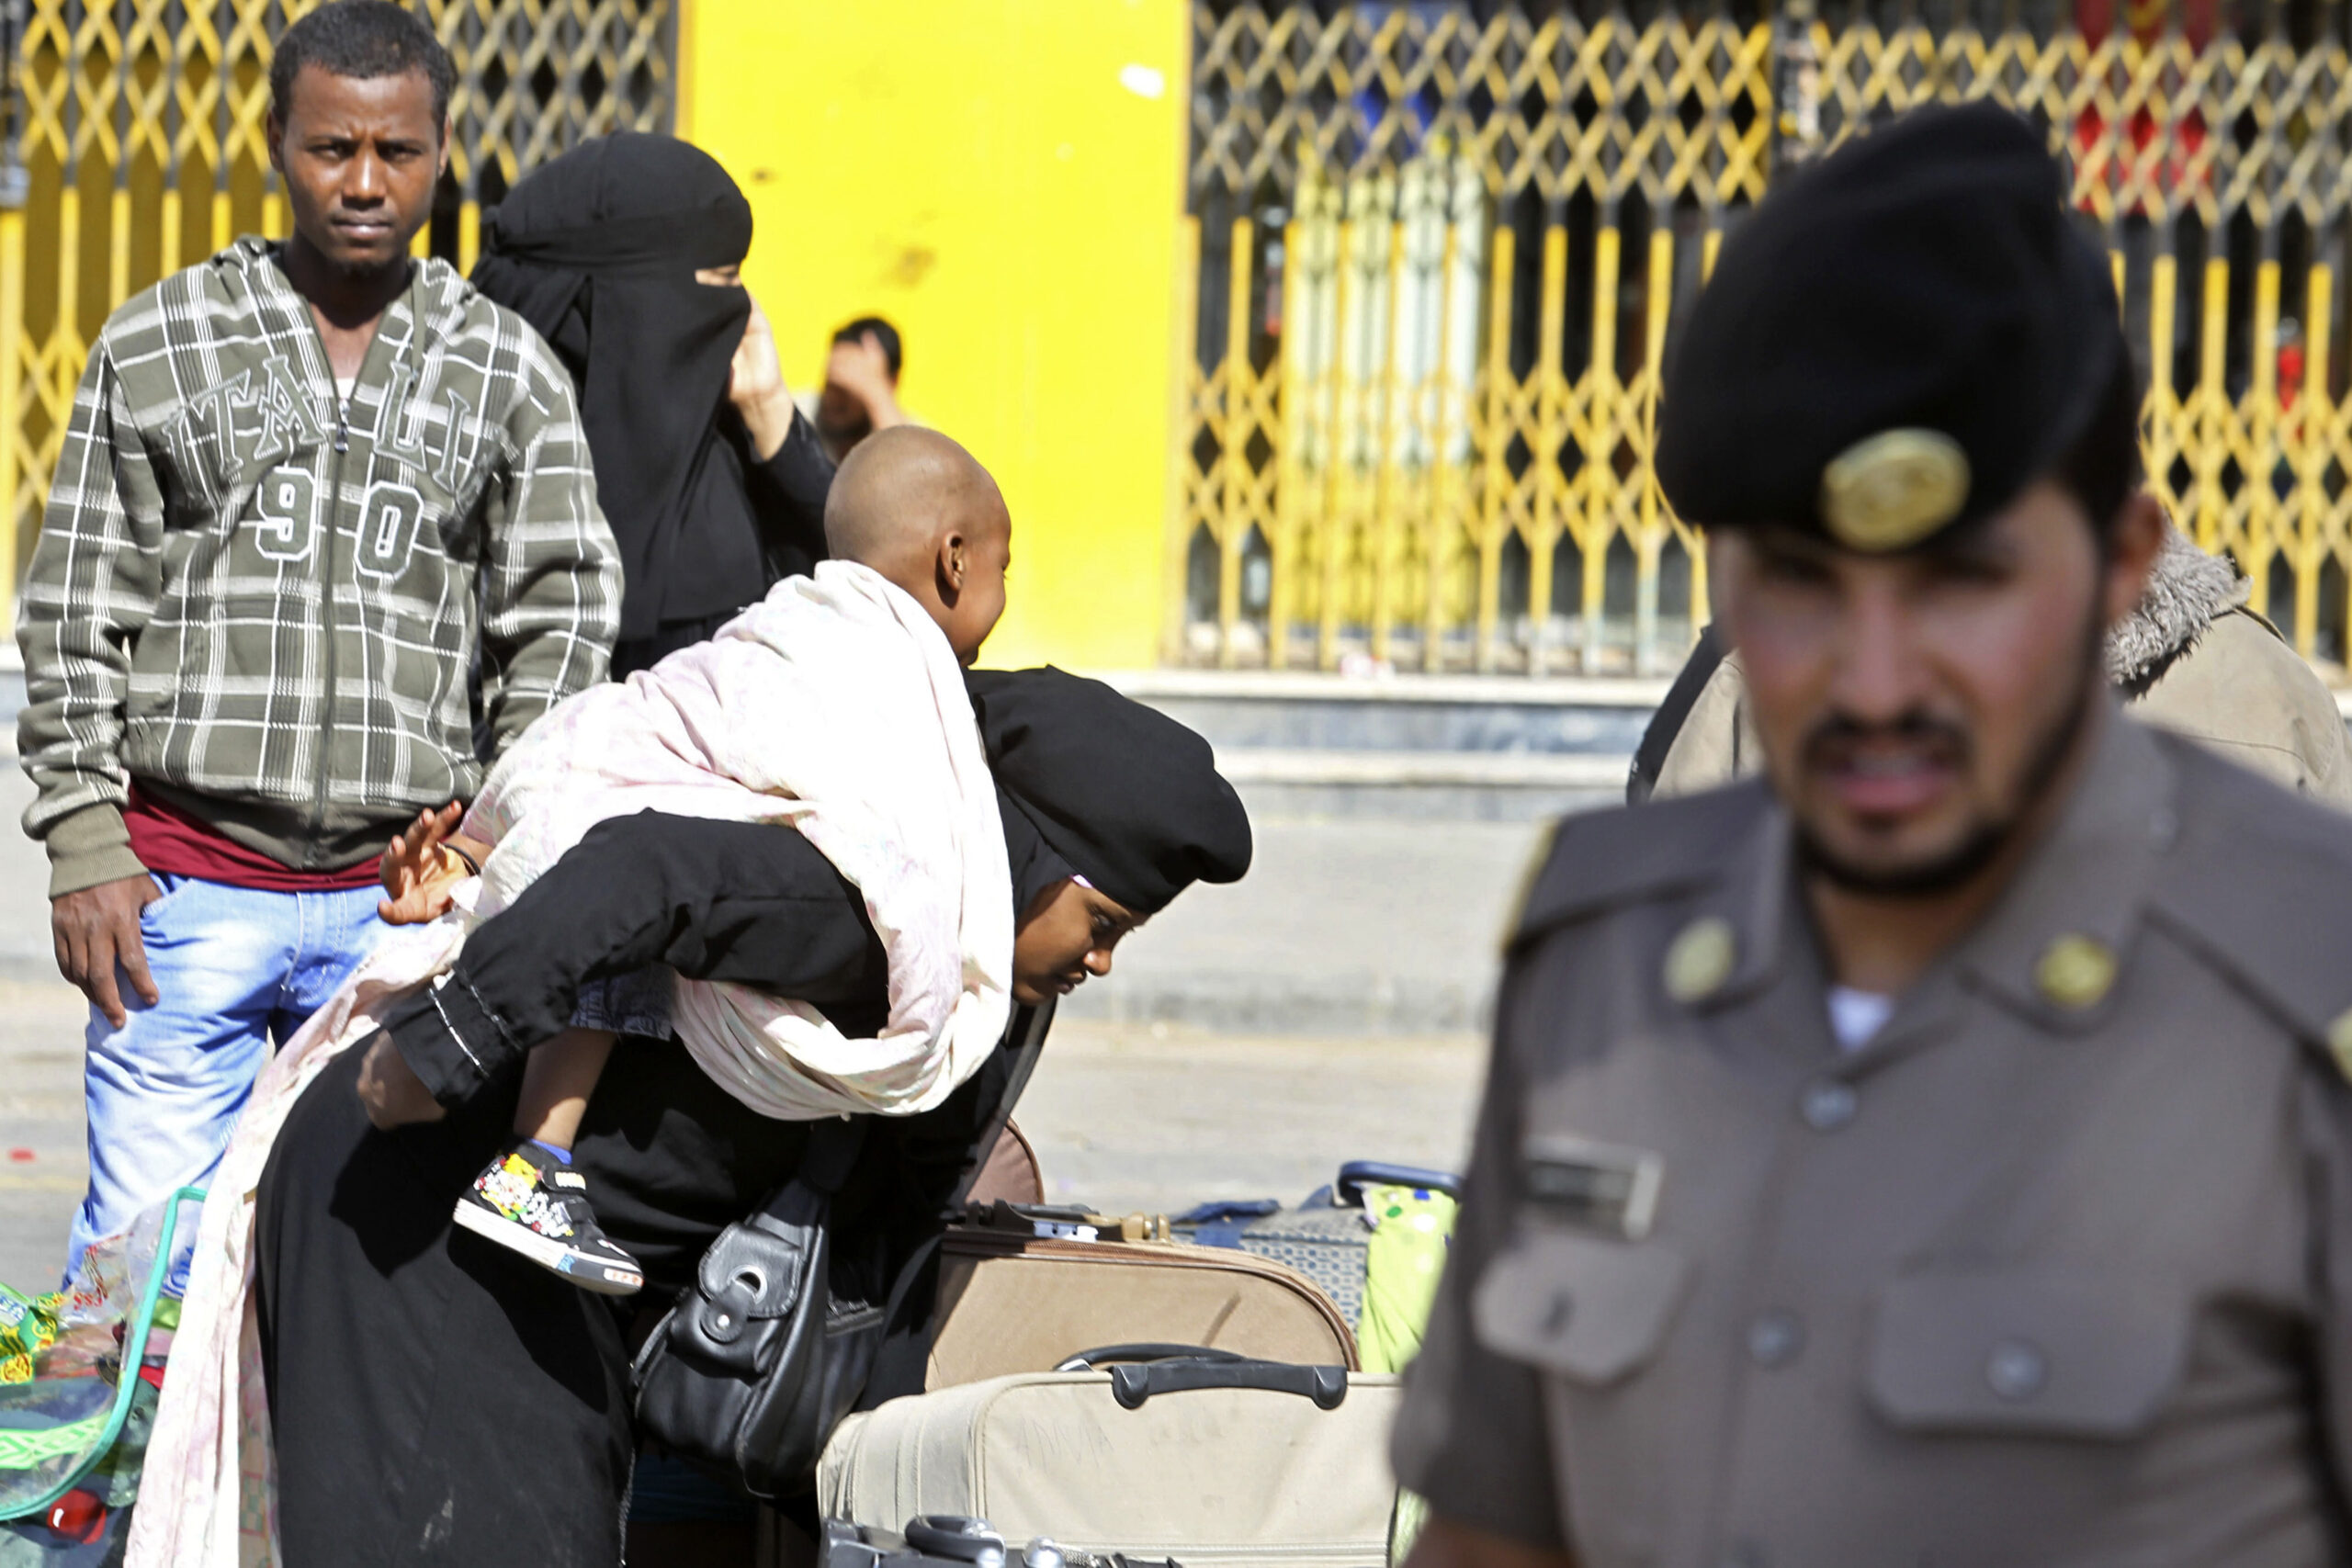 2013 11 11t000000z 1557008057 gm1e9bb1o9n01 rtrmadp 3 saudi foreignworkers riot scaled